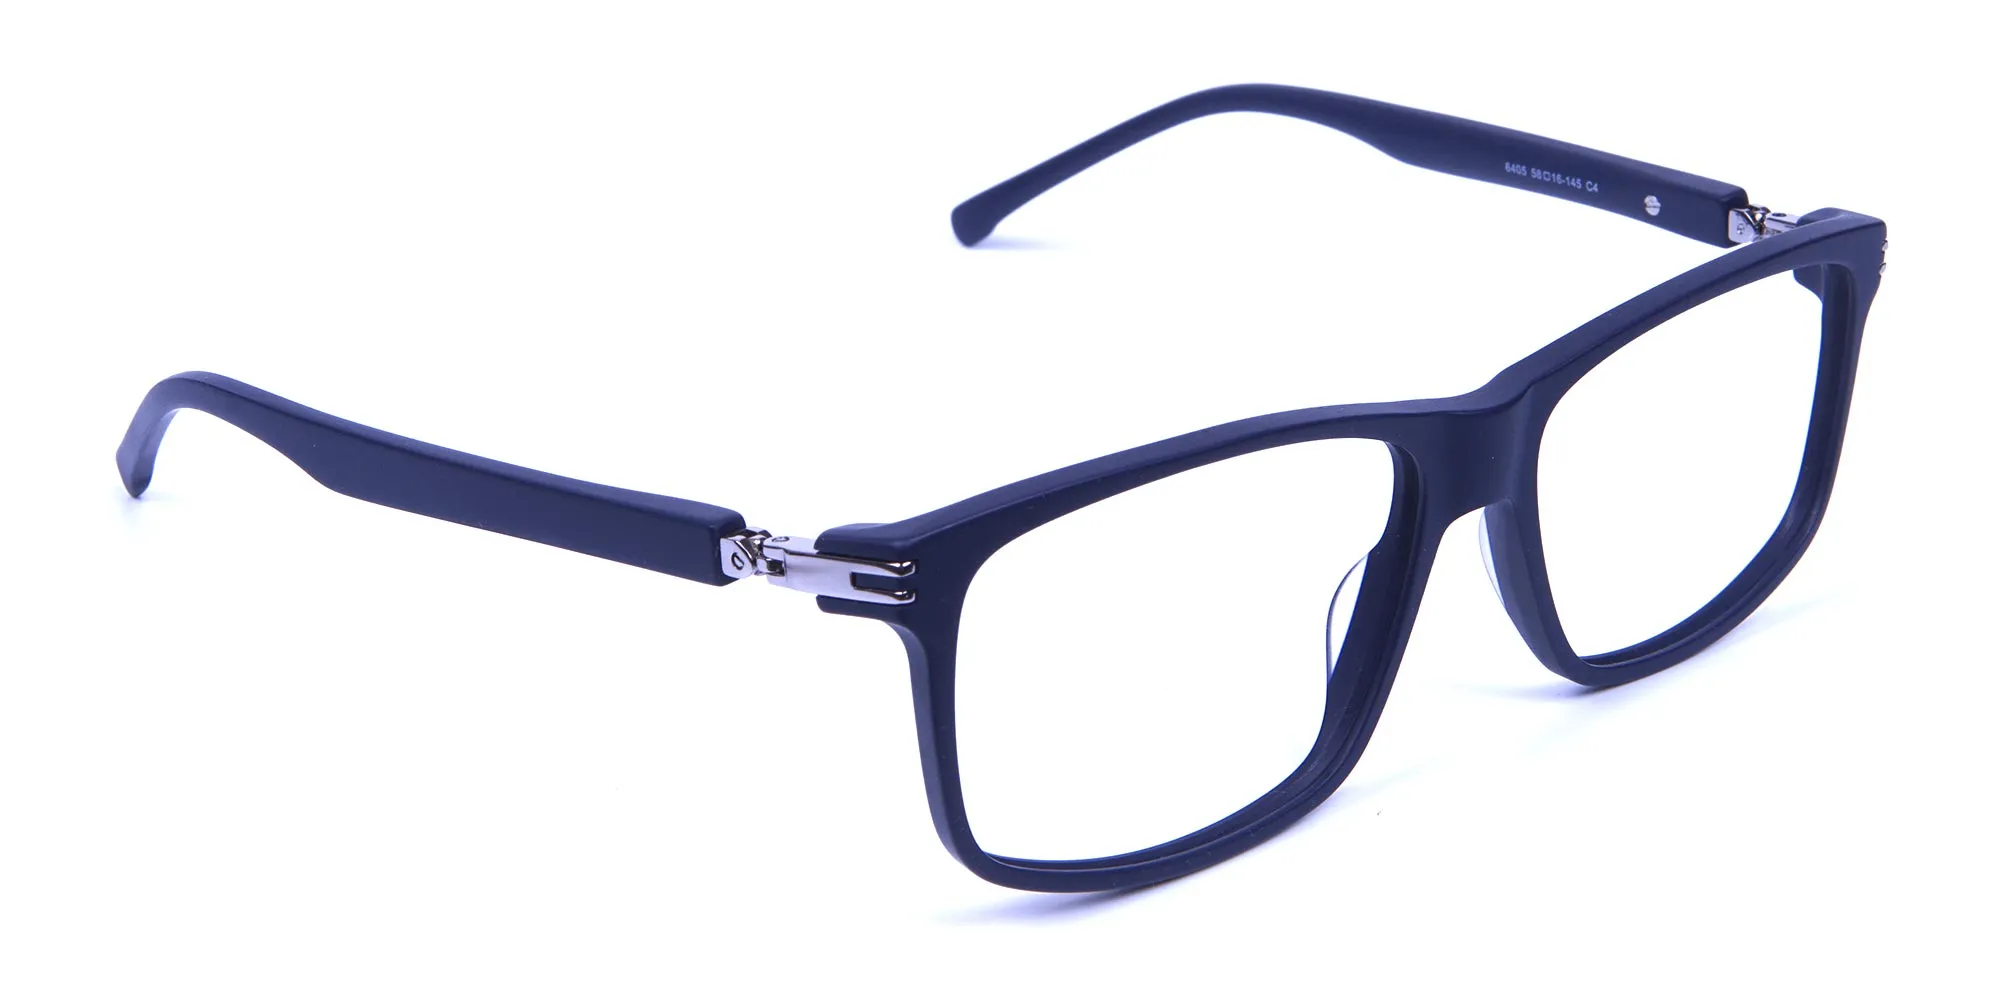 Light Weight Detail Crafted Glasses in Blue - 1